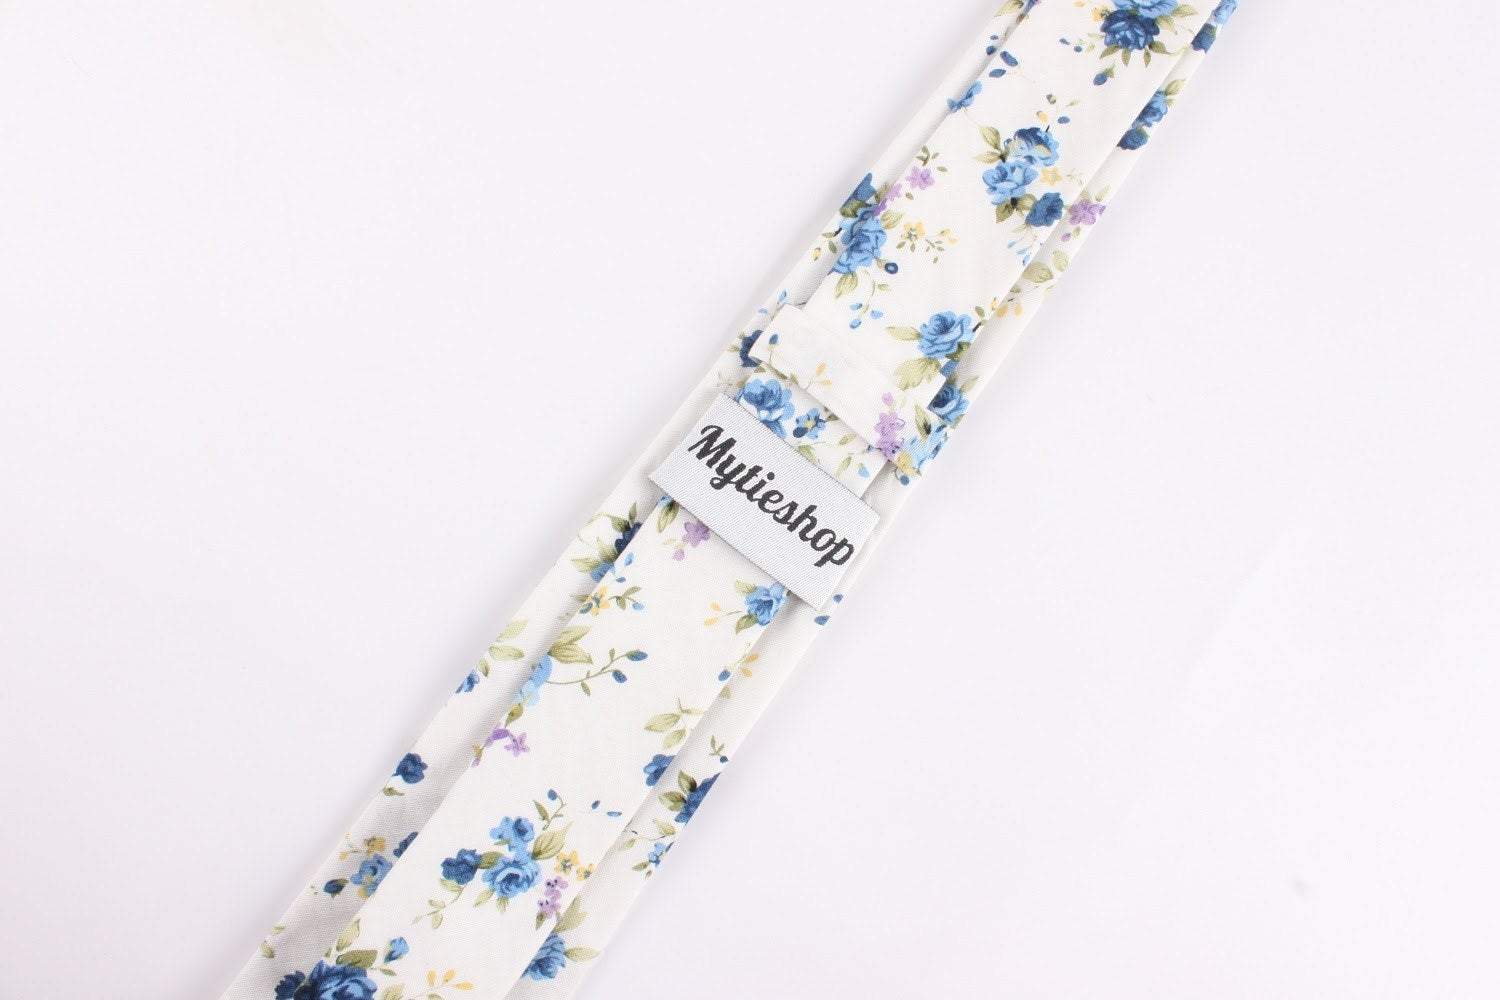 White Floral Tie 2.36&quot; SAGE - MYTIESHOP | toile de jouy Floral print-Neckties-Dry flowers Floral skinny tie for anniversaries weddings prom and other events. Flower cotton necktie. toile de jouy Floral tie White floral tie white-Mytieshop. Skinny ties for weddings anniversaries. Father of bride. Groomsmen. Cool skinny neckties for men. Neckwear for prom, missions and fancy events. Gift ideas for men. Anniversaries ideas. Wedding aesthetics. Flower ties. Dry flower ties.